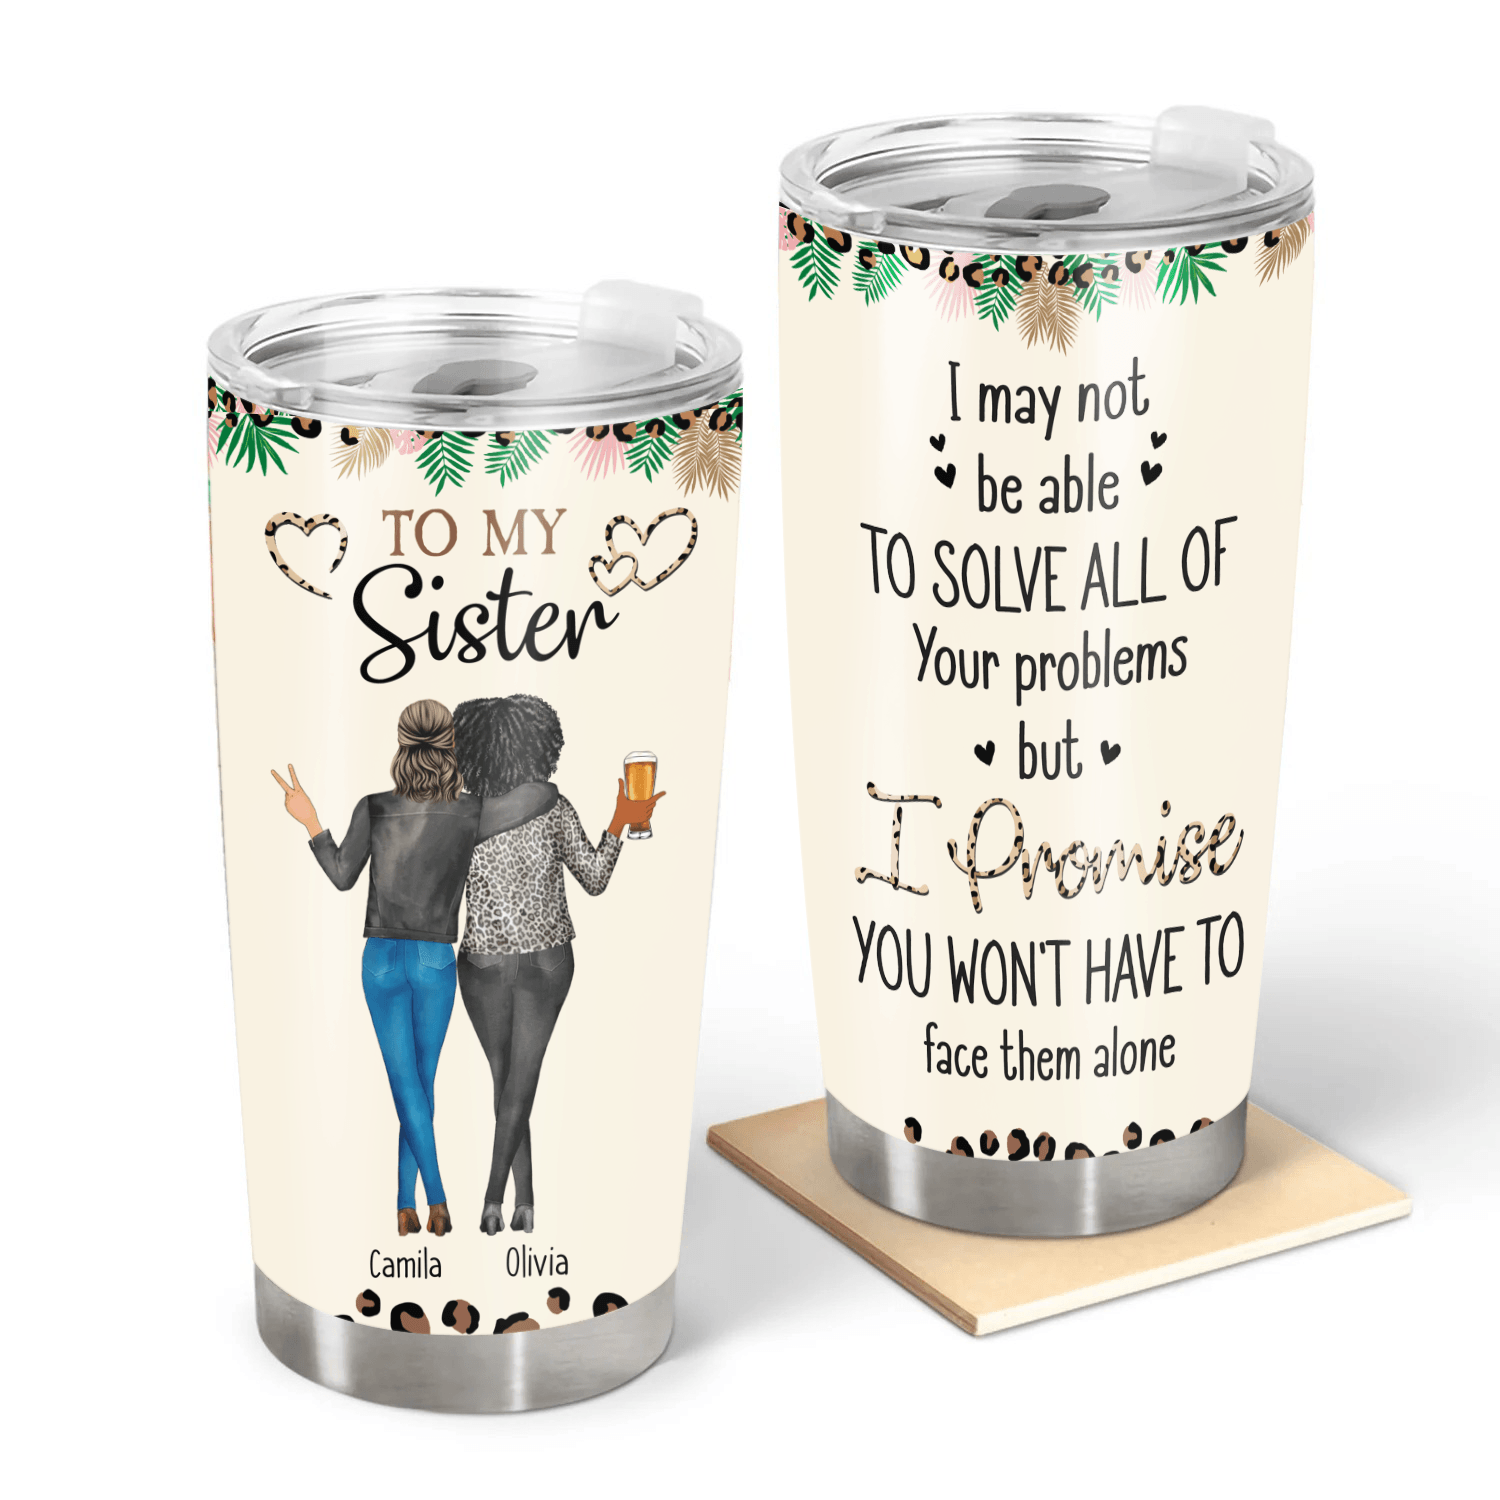 Thank You For Standing By My Side Friendship - Personalized Custom 20oz Fat Tumbler Cup - Personalized Gift For Her, Besties, Friends, Sister, Soul Sisters - Suzitee Store